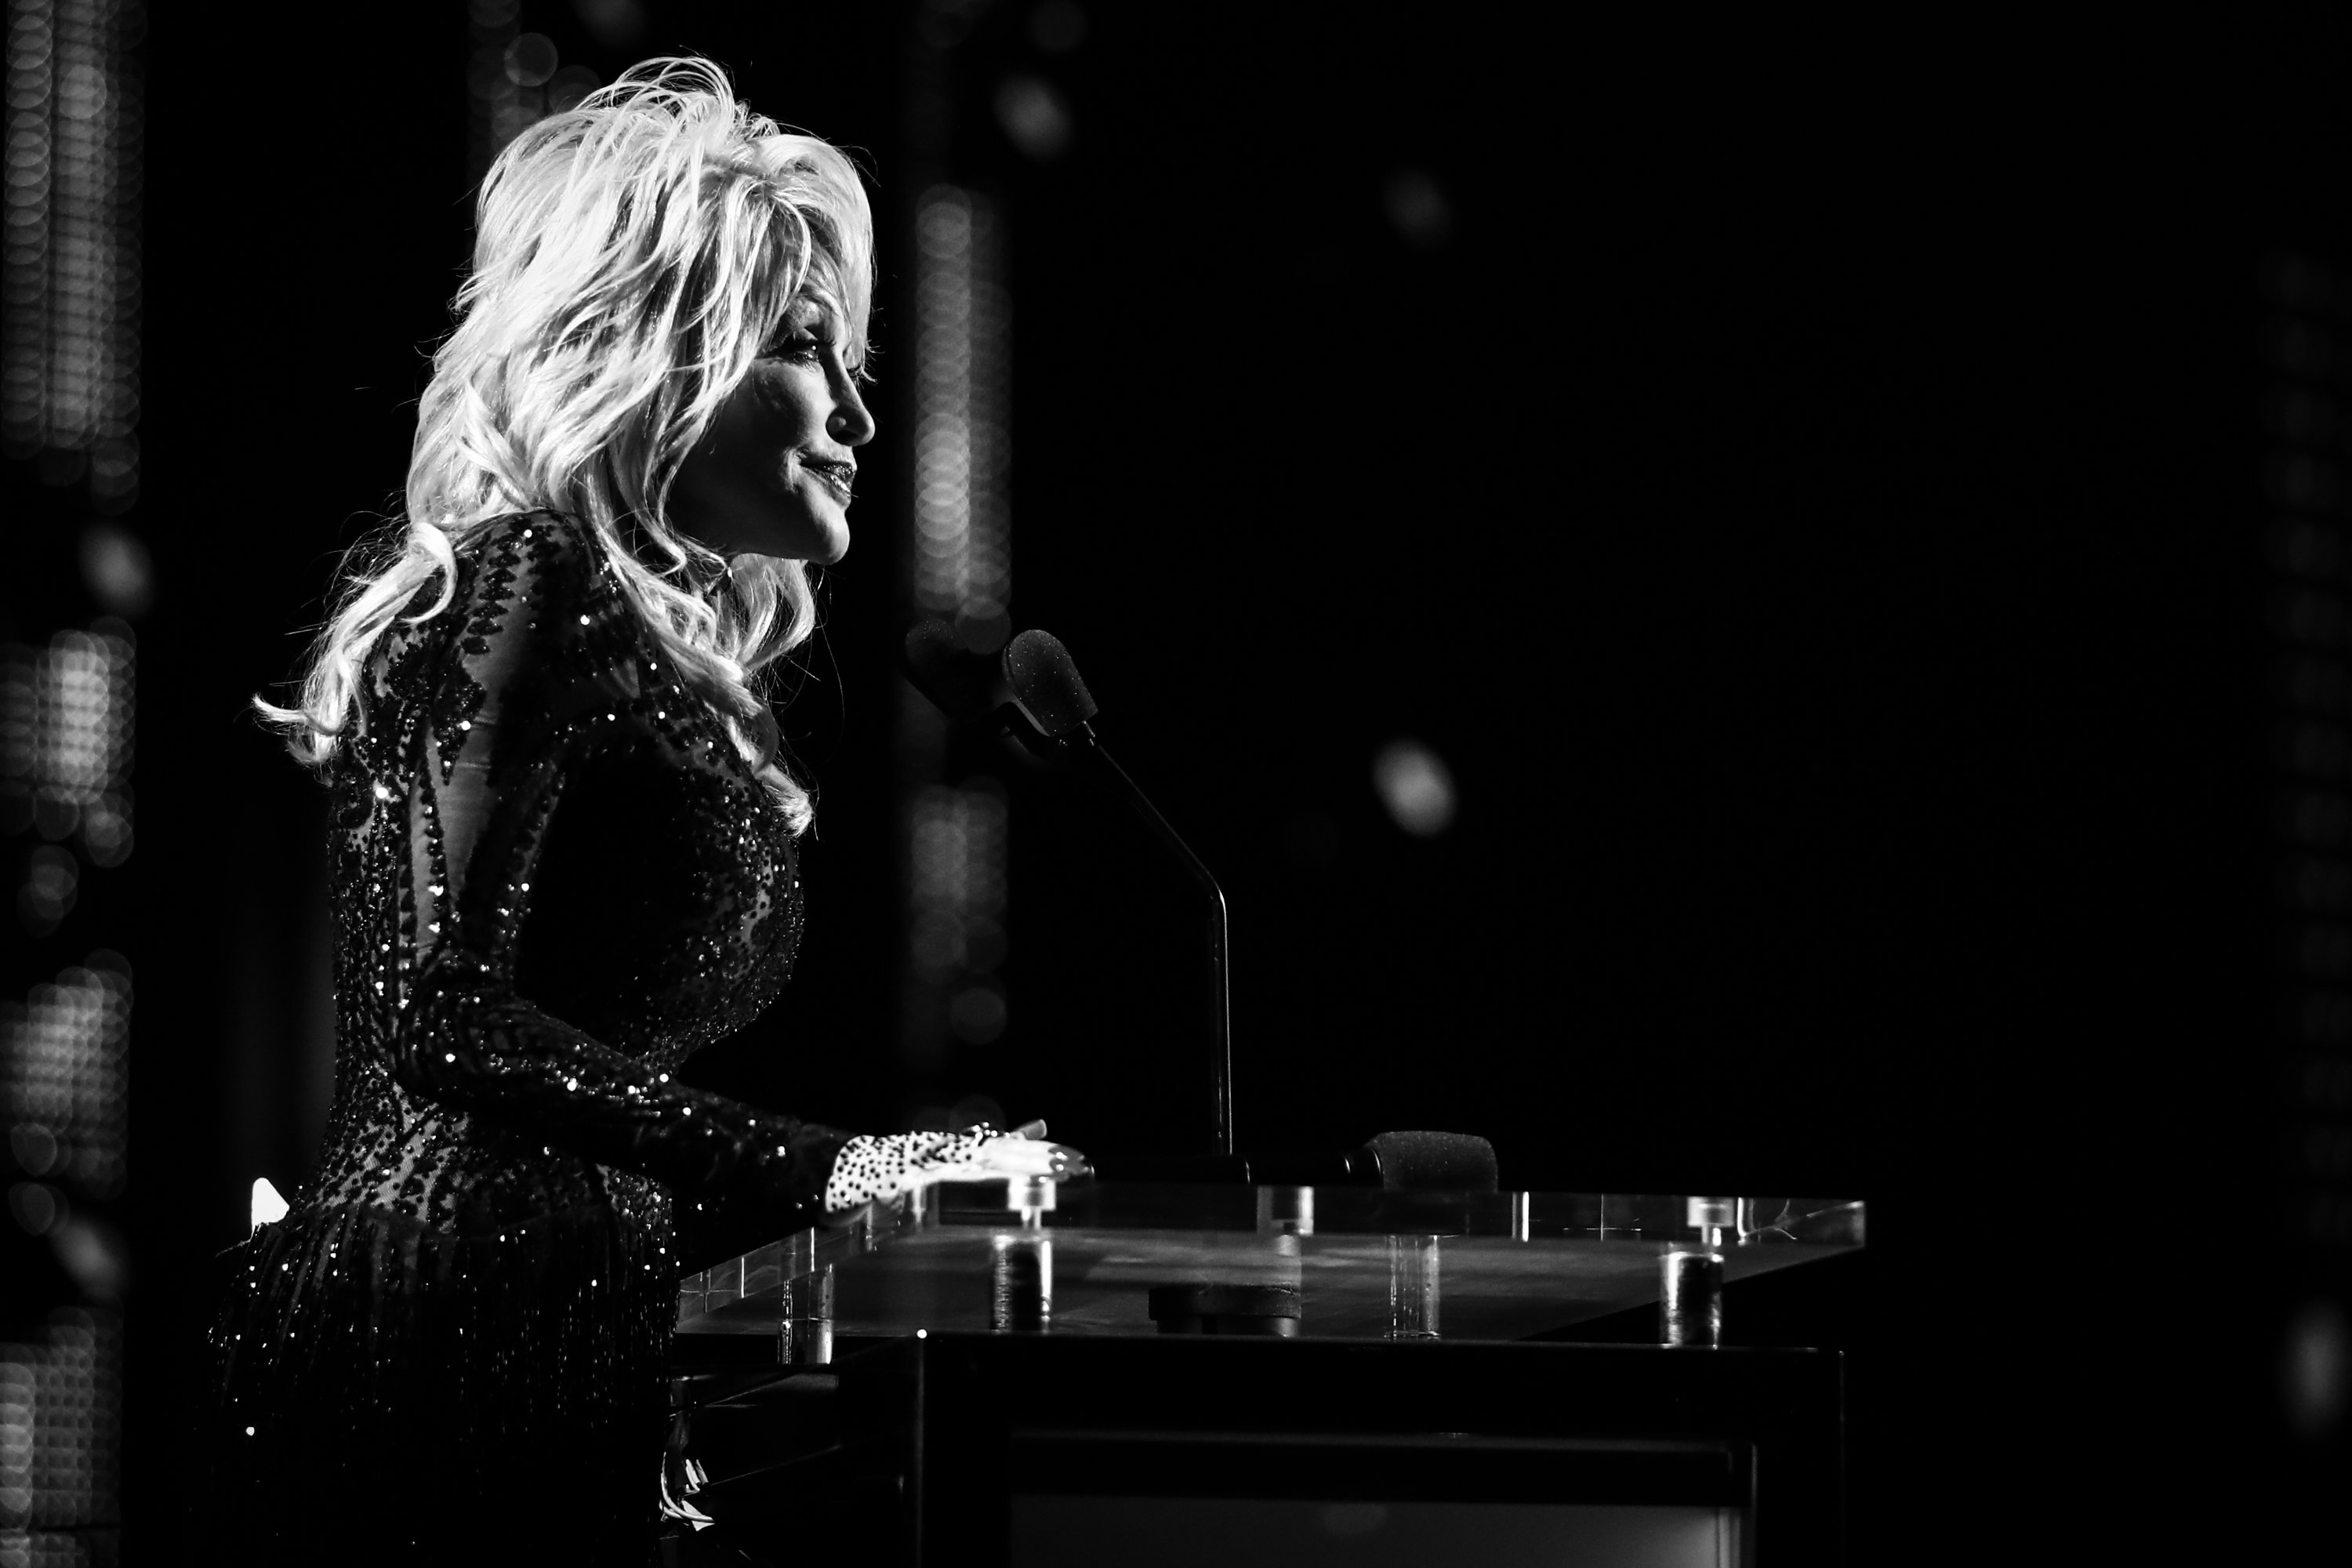 Dolly Parton photographed playing the piano on stage in black and white.